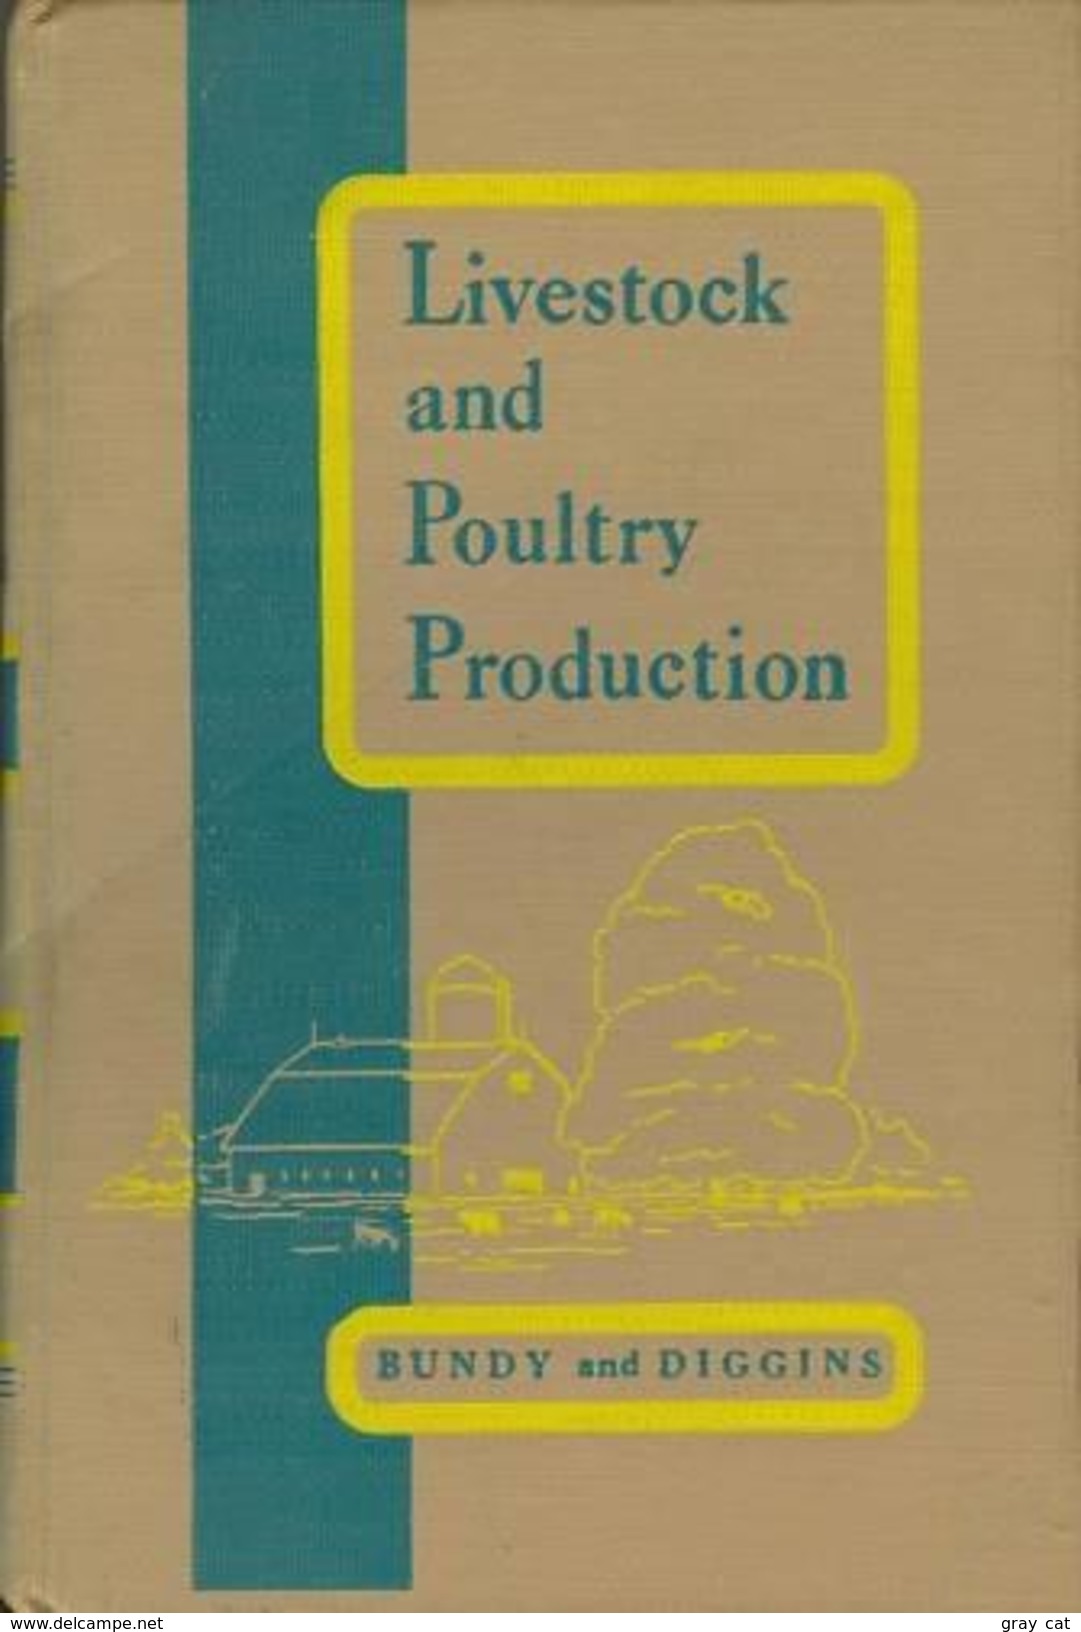 Livestock And Poultry Production: Principles And Practices By Clarence E. Bundy & Ronald V. Diggins - 1950-Hoy